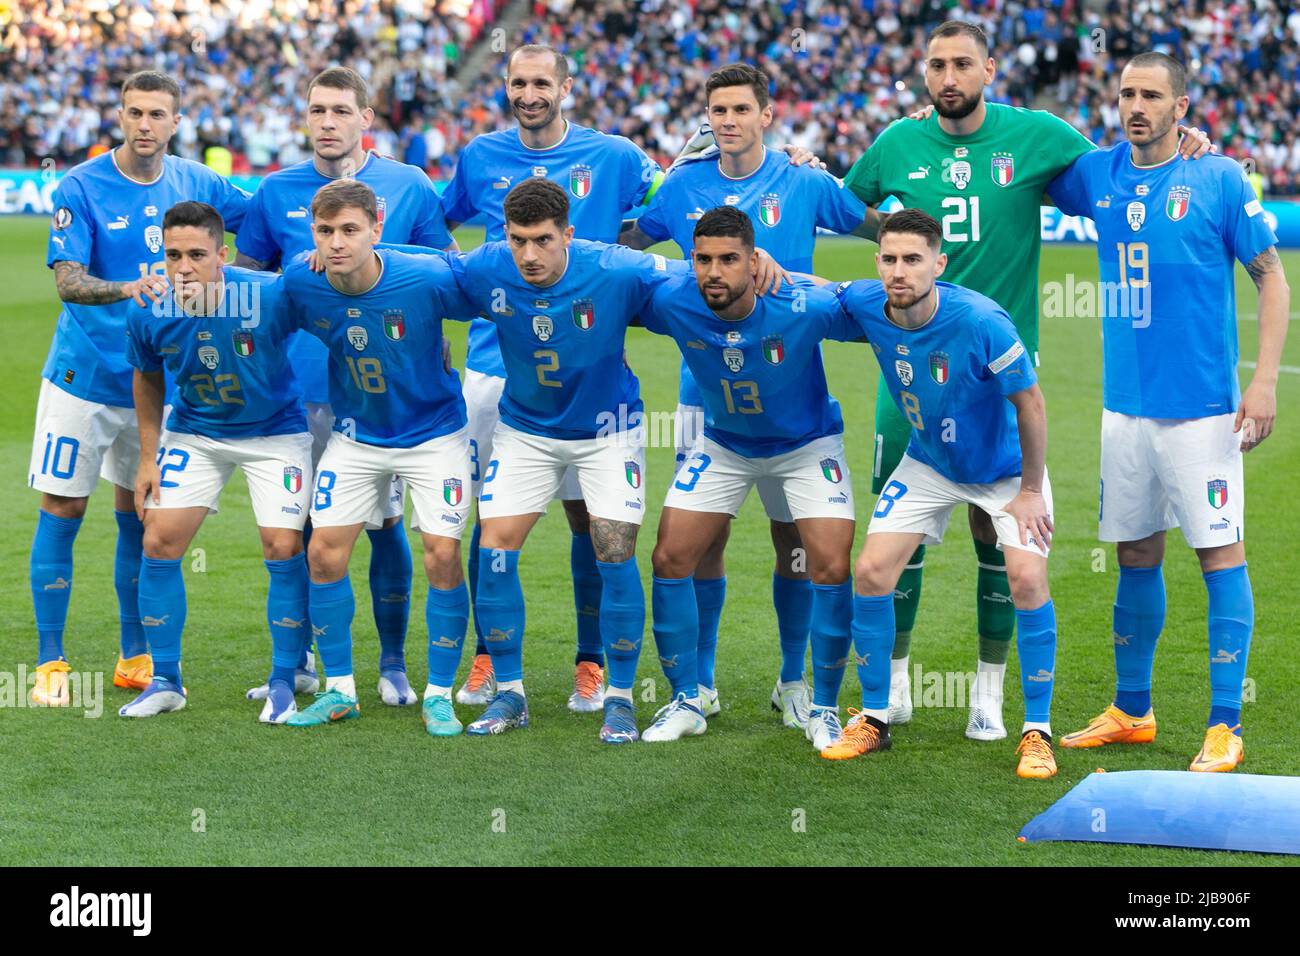 Players on Italy before the Italy v Argentina - Finalissima 2022 match at Wembley Stadium on June 1, 2022 in London, England.(MB Media) Stock Photo